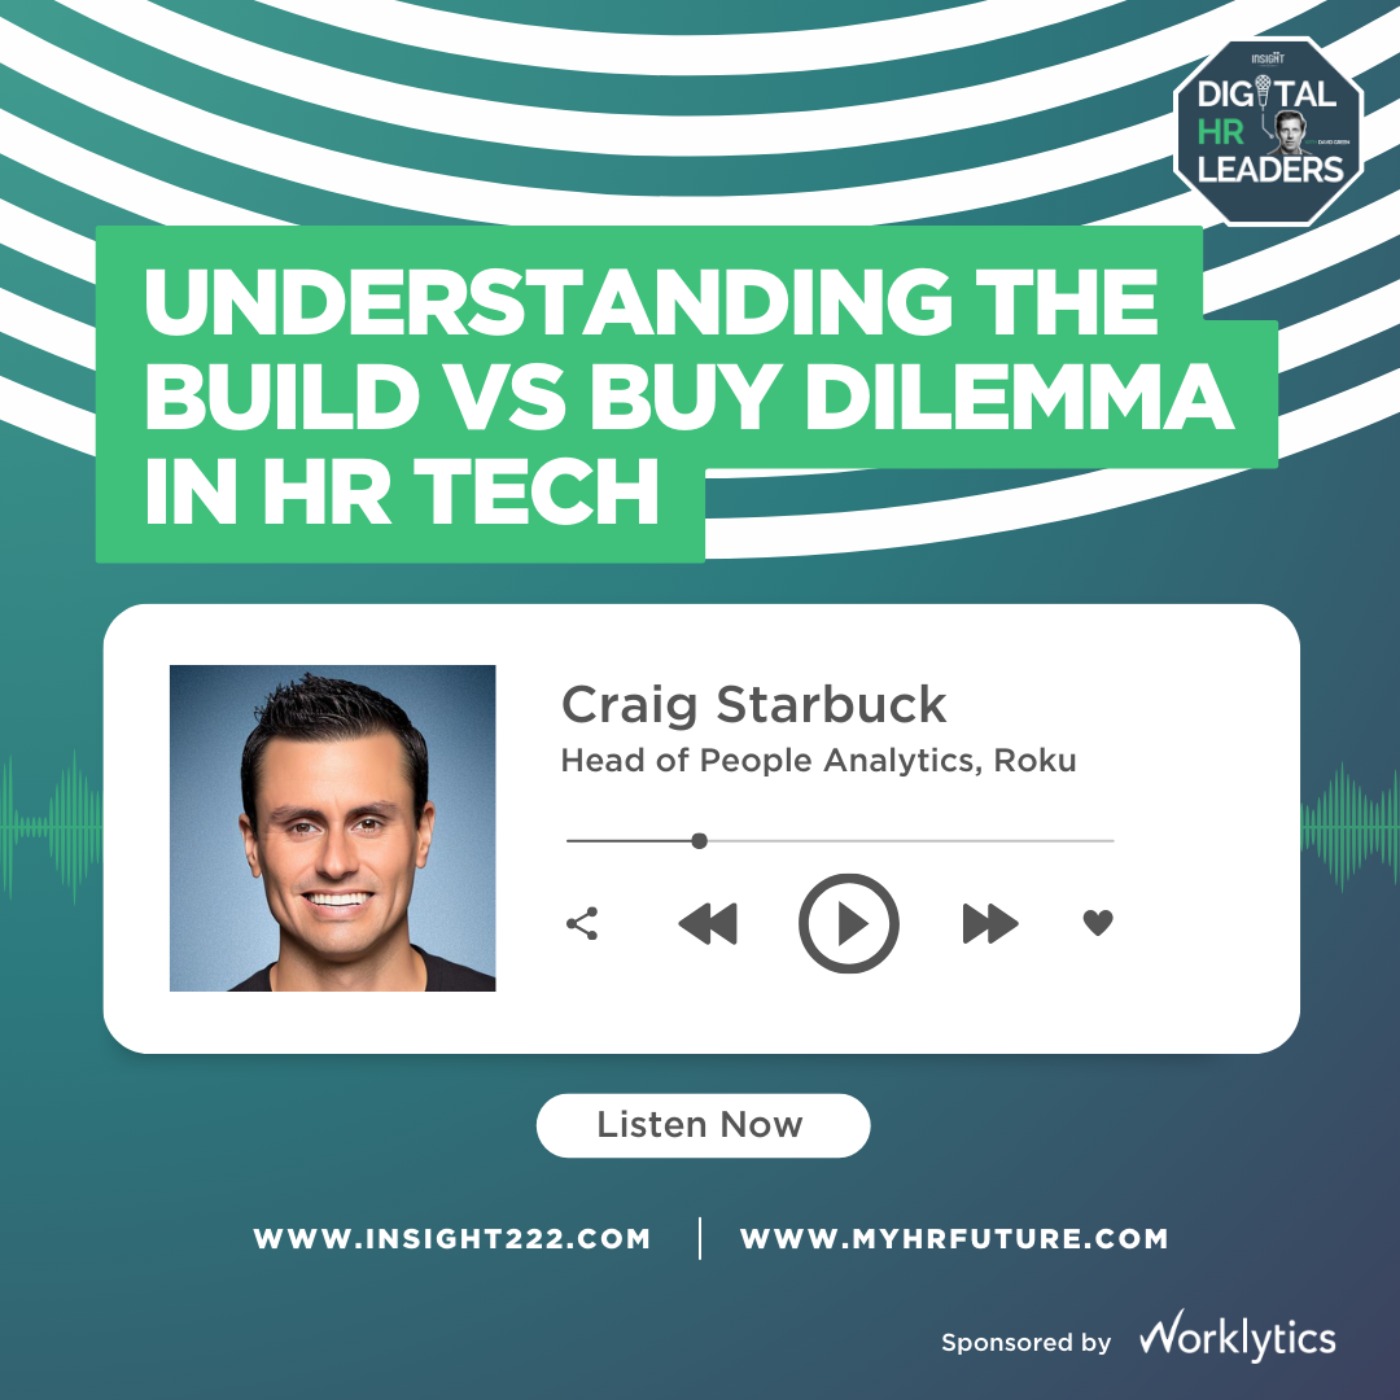 Understanding the Build vs Buy Dilemma in HR Tech (an Interview with Craig Starbuck)